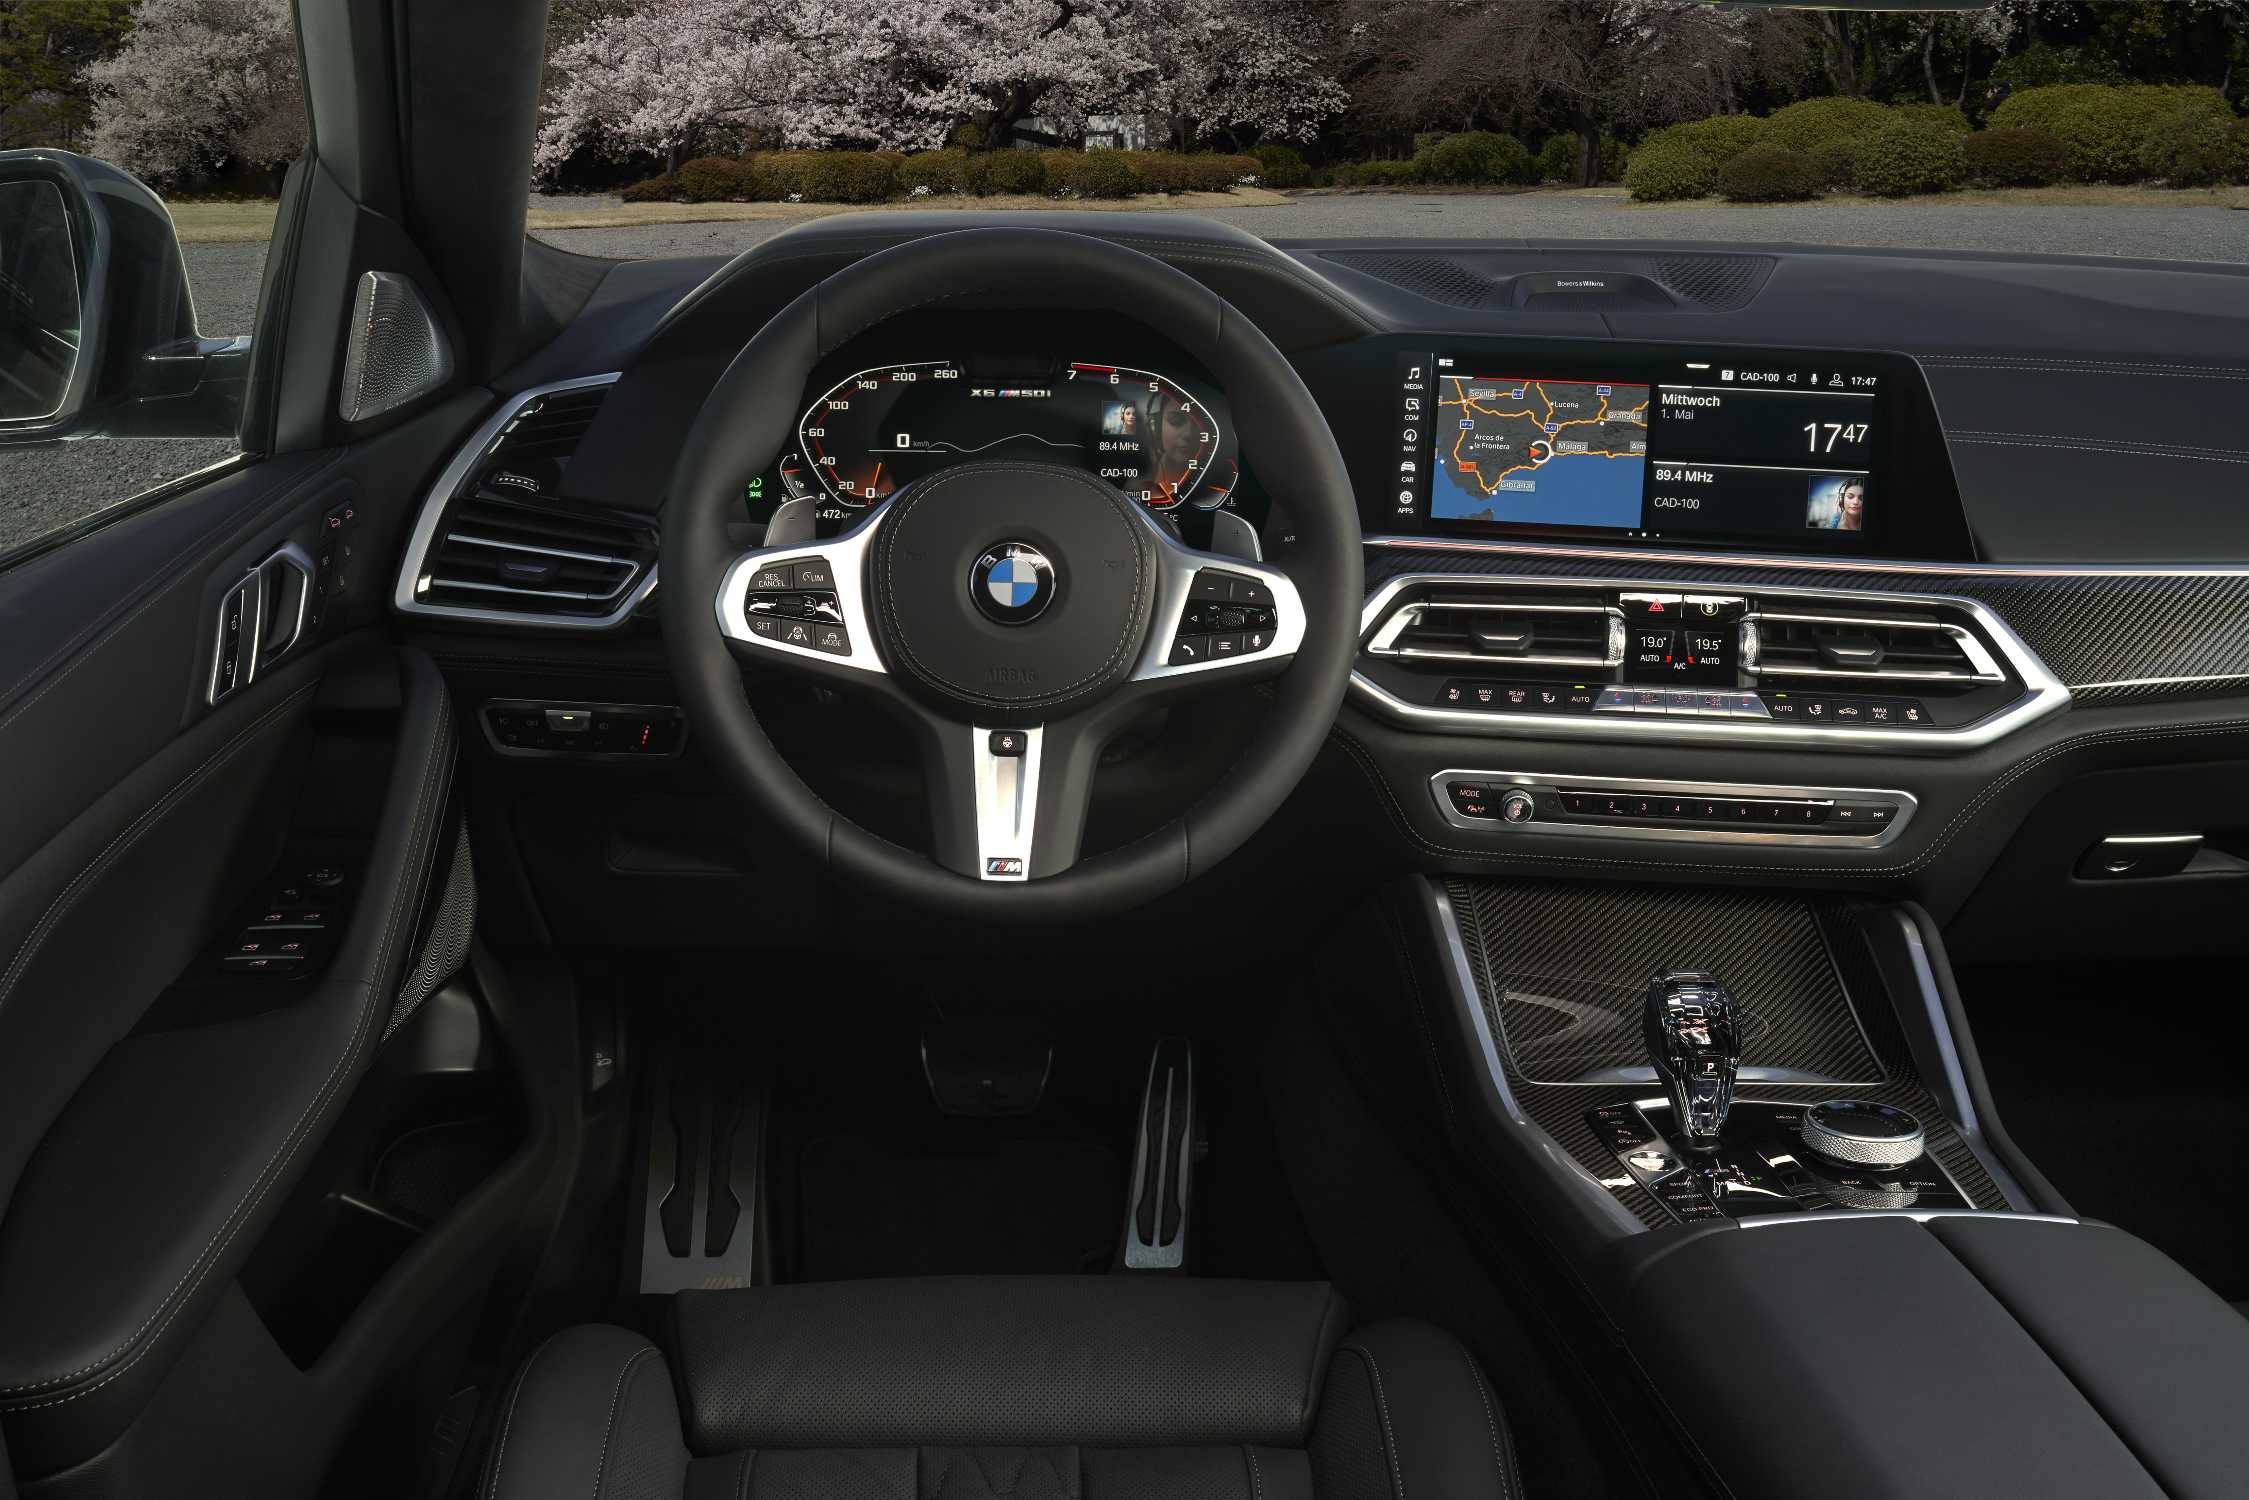 The new BMW X6 – Interieur and Details (07/2019).